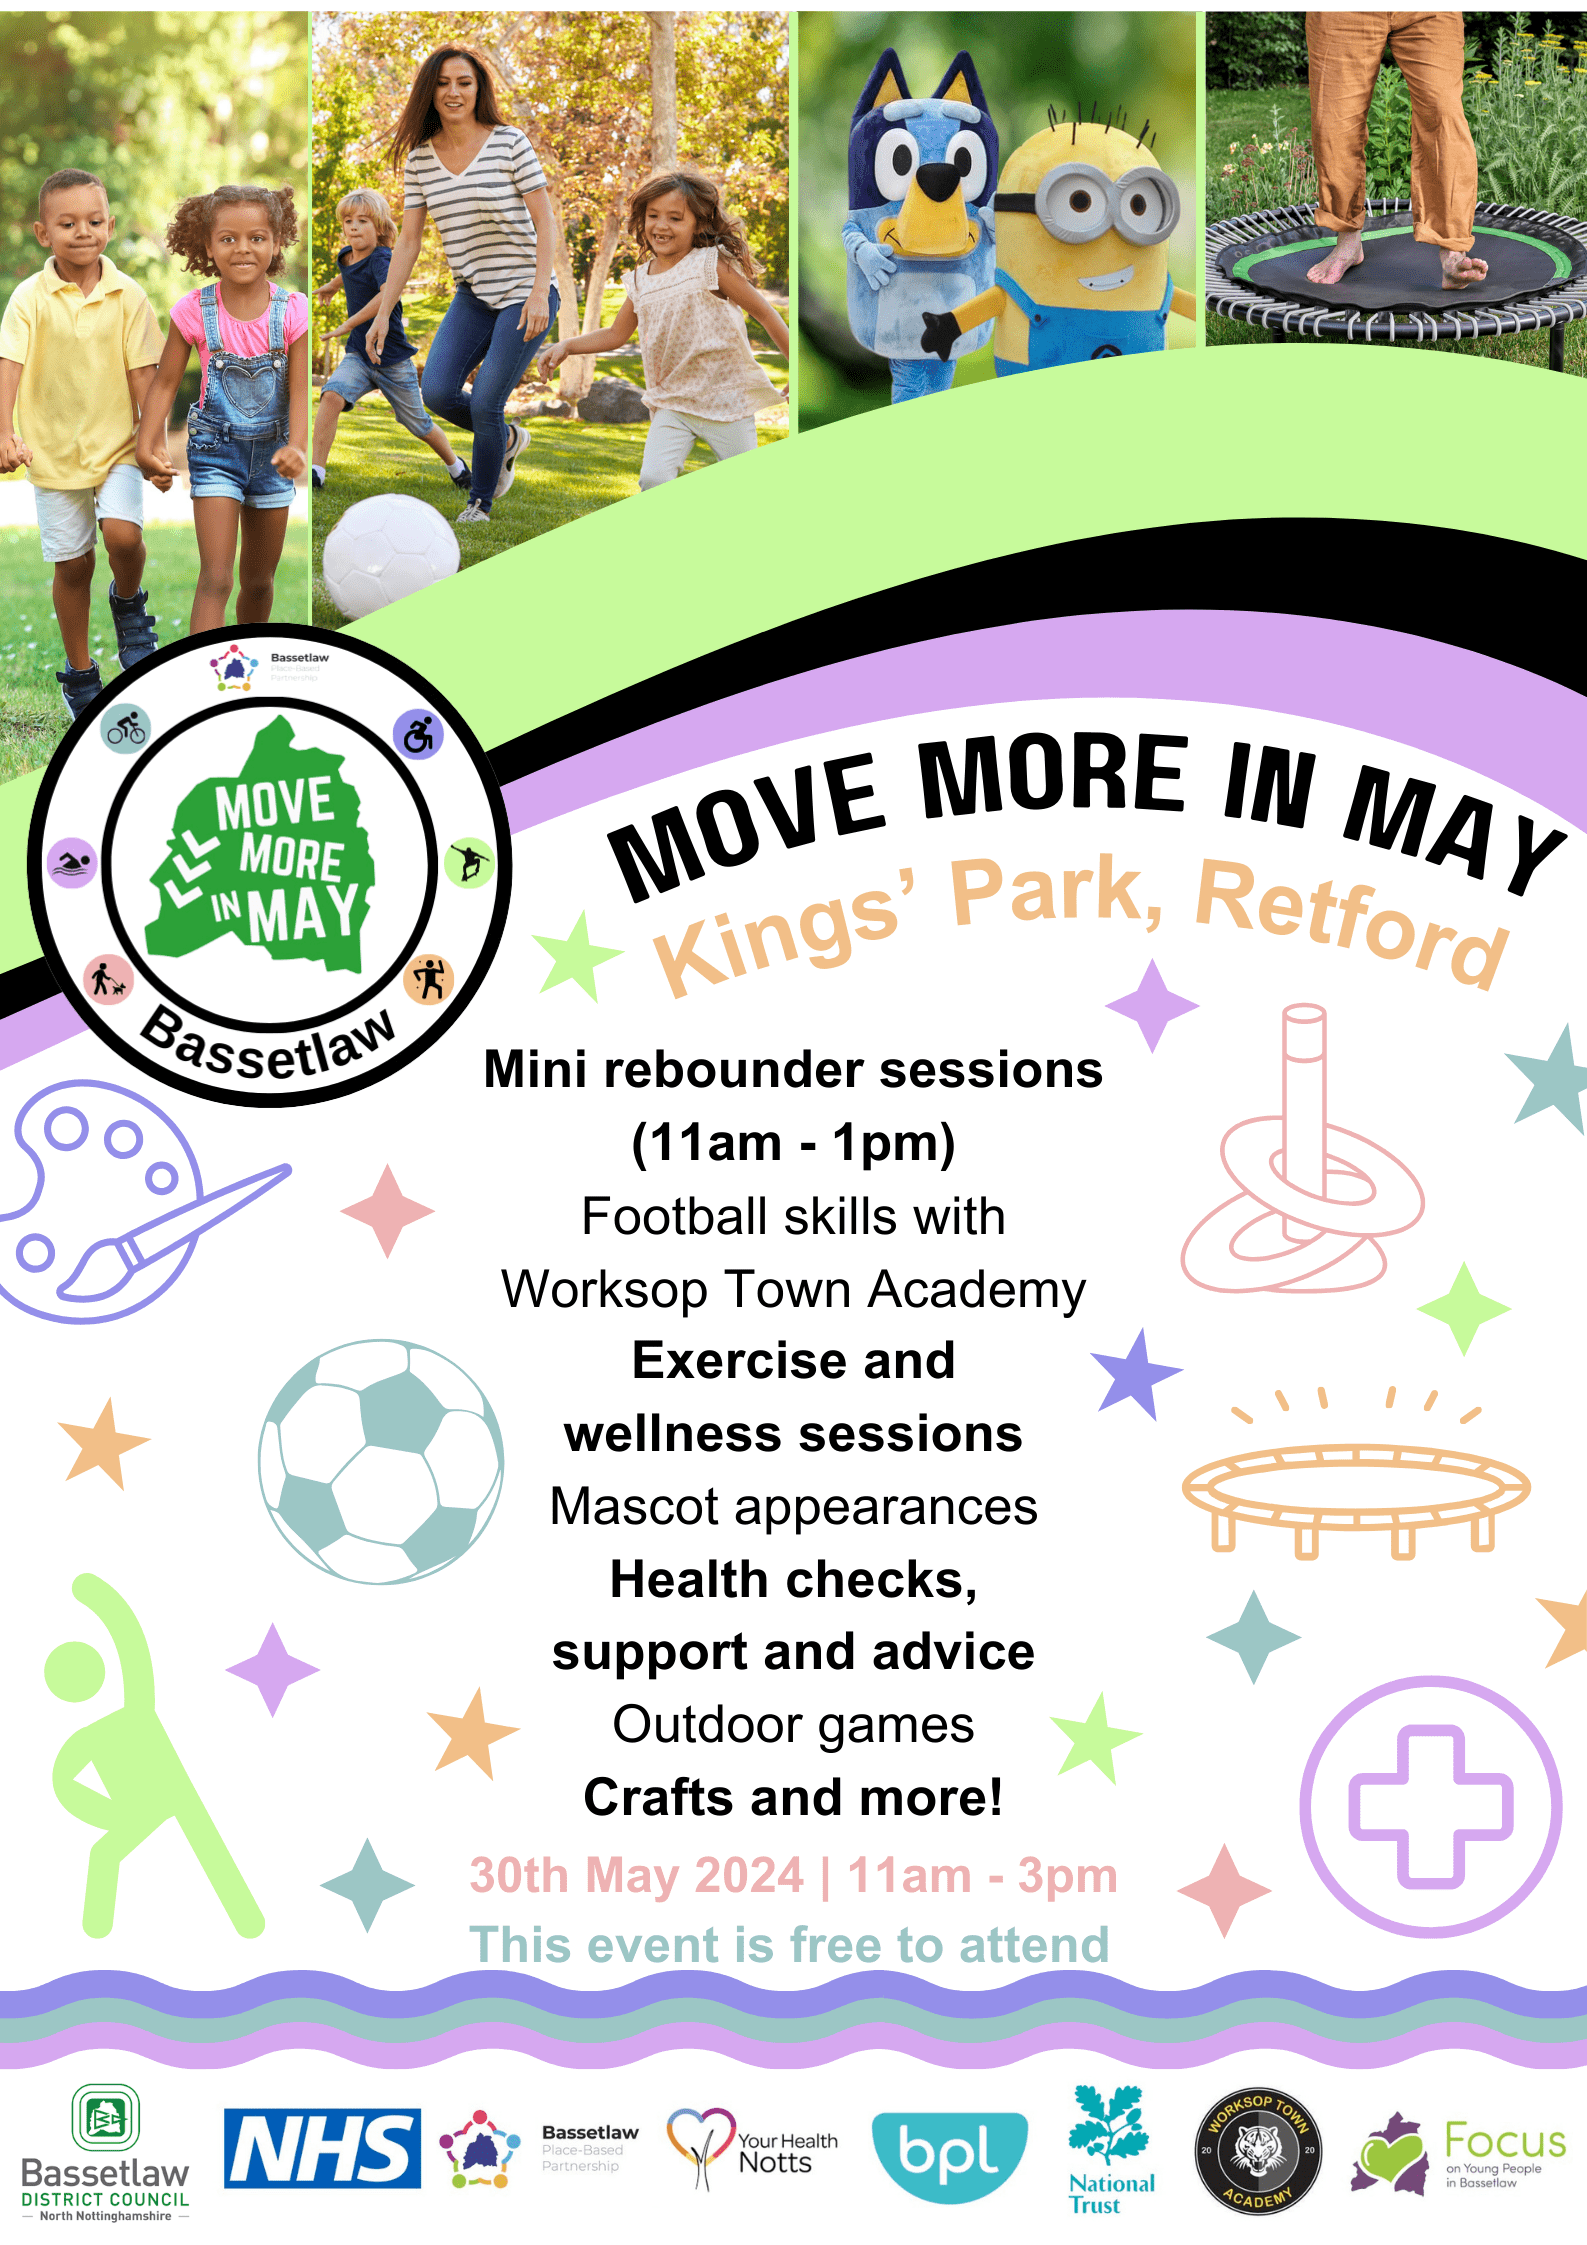 Move More in May comes to Kings Park!